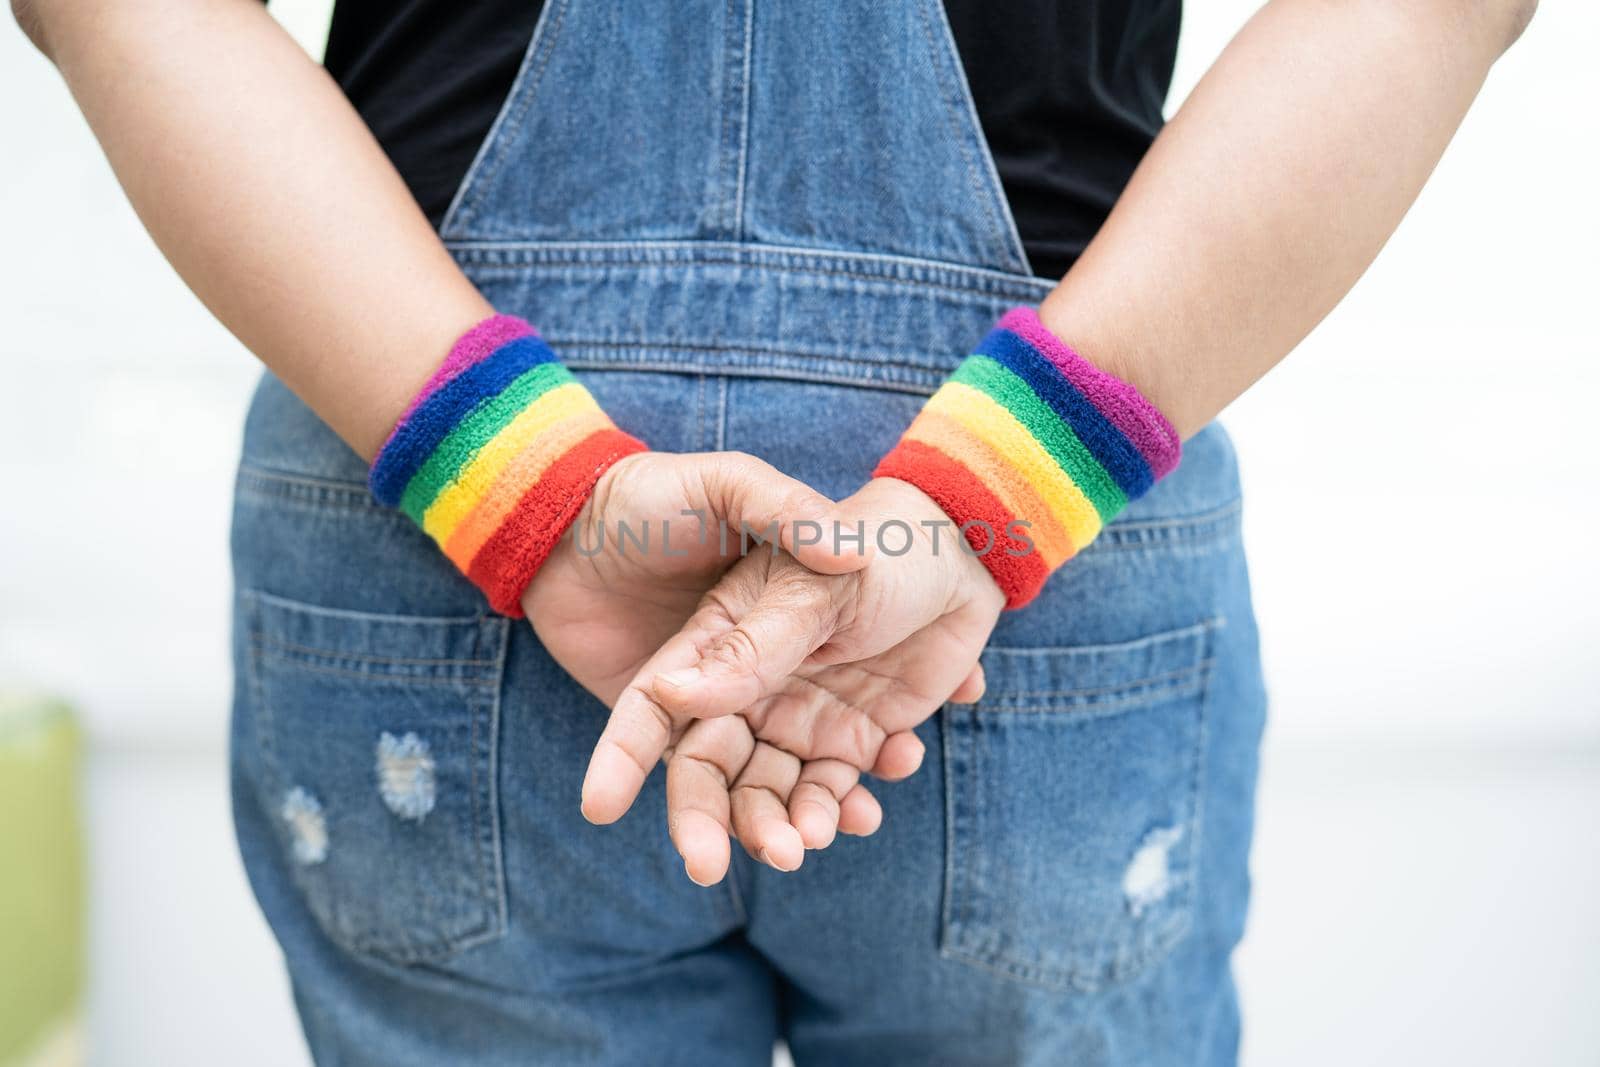 Asian lady wearing rainbow flag wristbands, symbol of LGBT pride month celebrate annual in June social of gay, lesbian, bisexual, transgender, human rights. by pamai